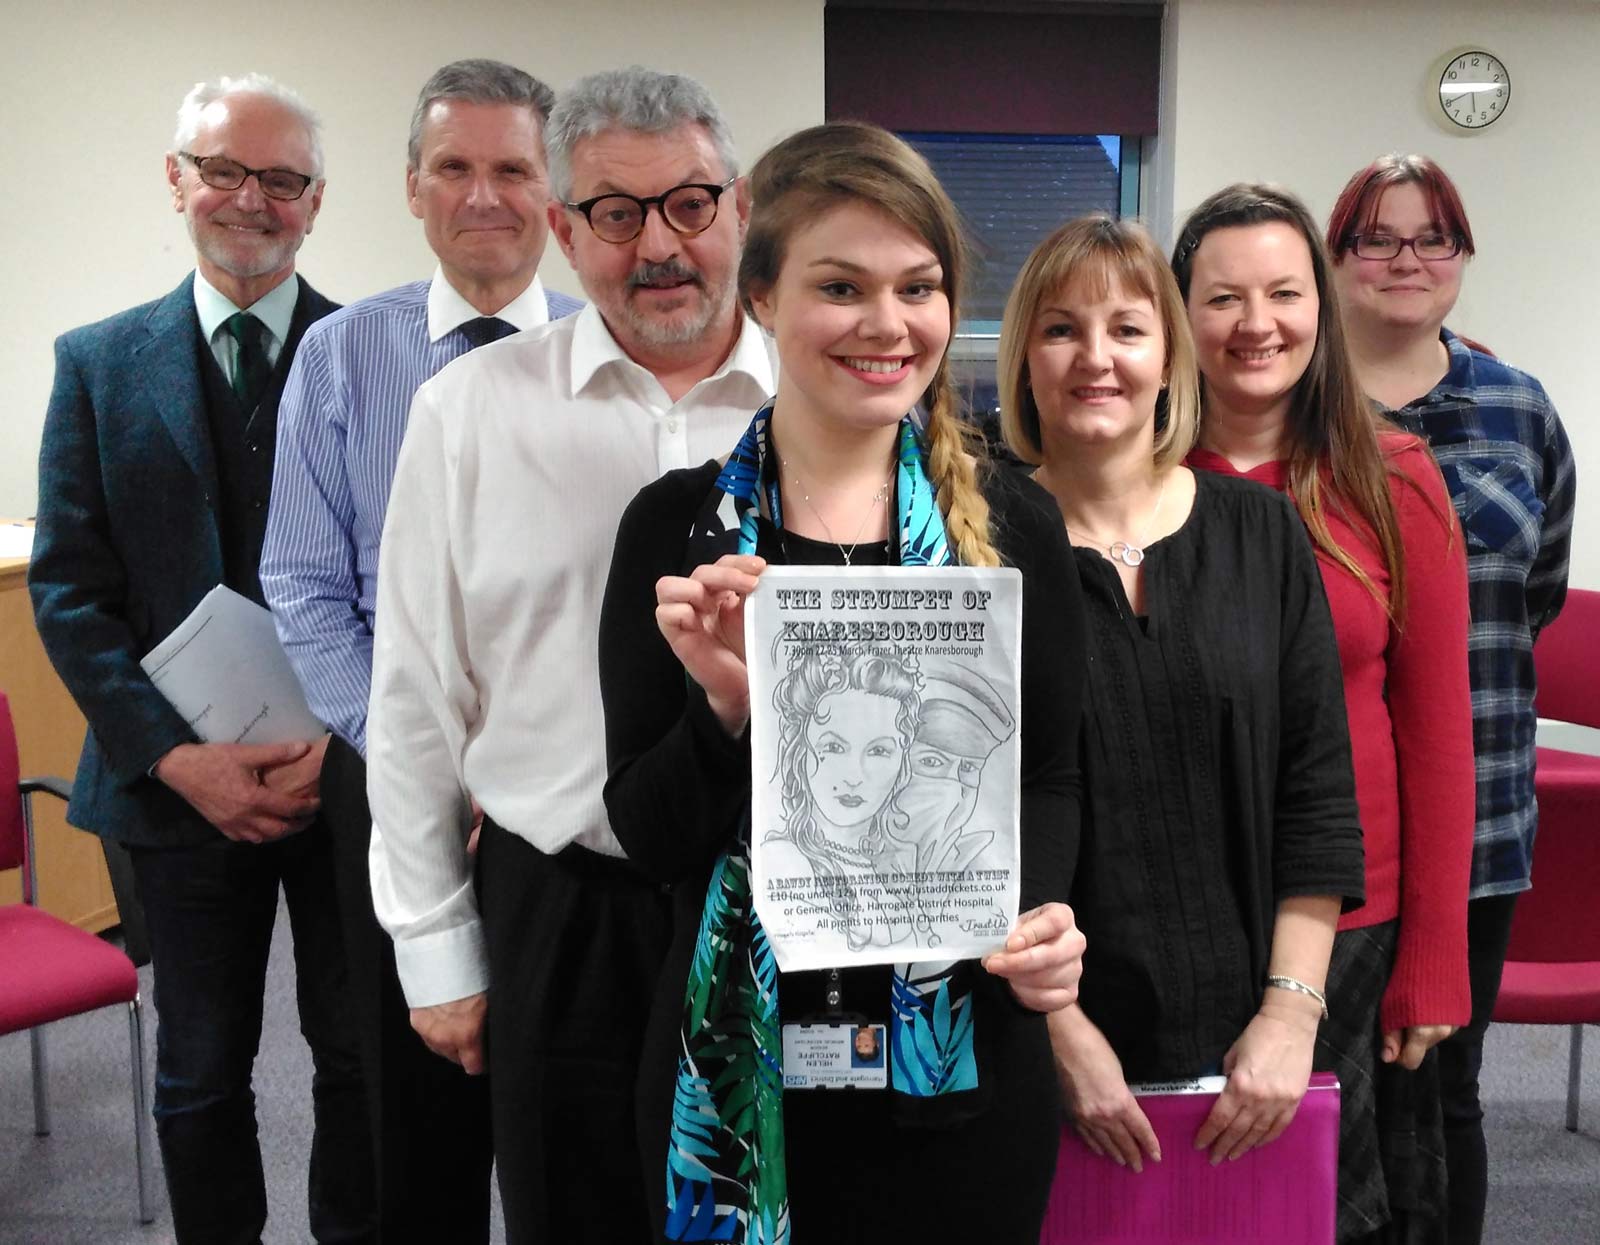 (L to R) Some of the cast of the Strumpet of Knaresborough: David Hoskins, Andrew Forsyth, Carl Gray, Helen Ratcliffe, Amanda Gillespie, Julia Bullock and Pam Blythe